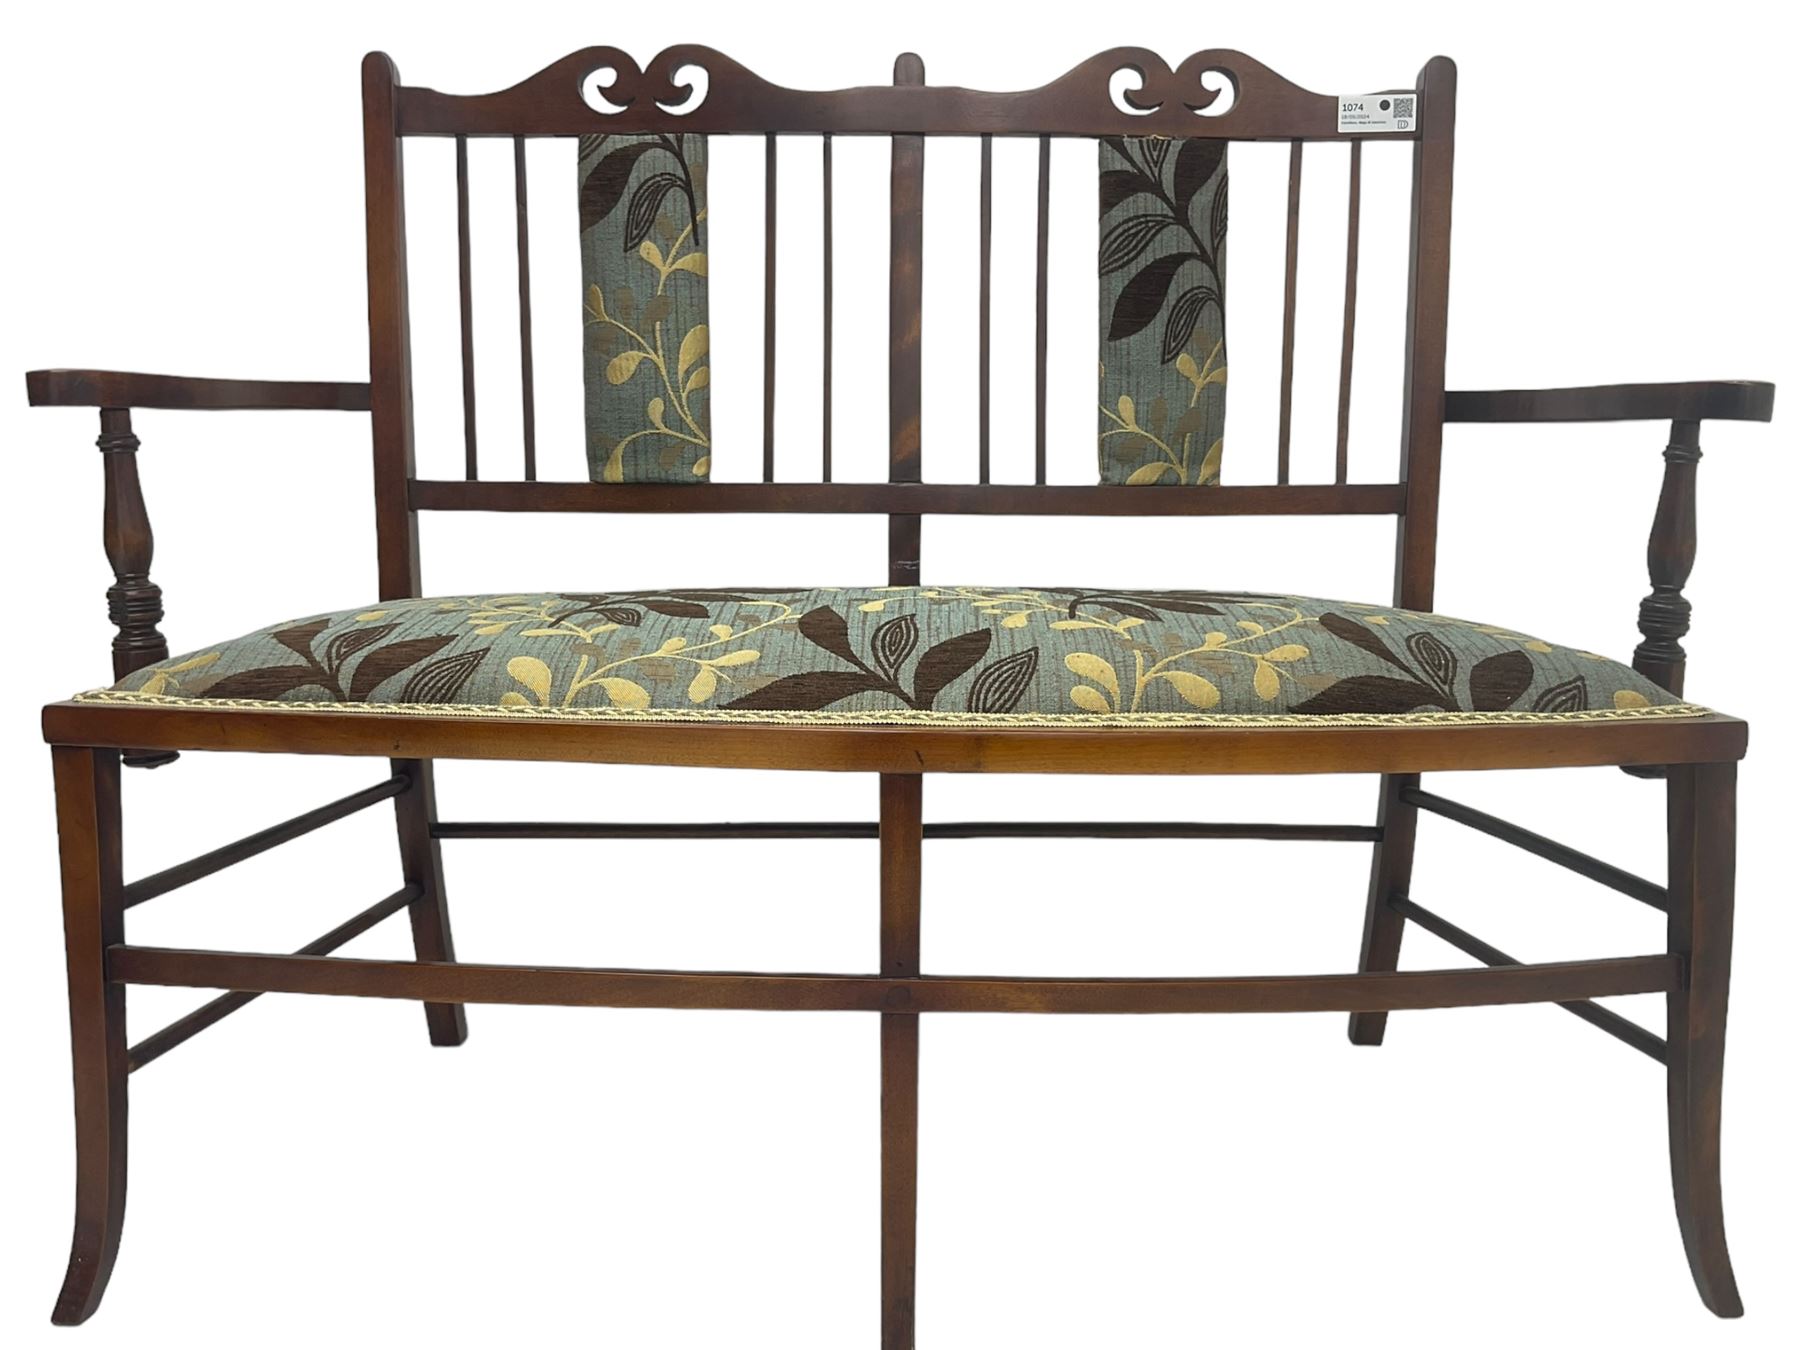 Edwardian stained beech framed two-seat settee